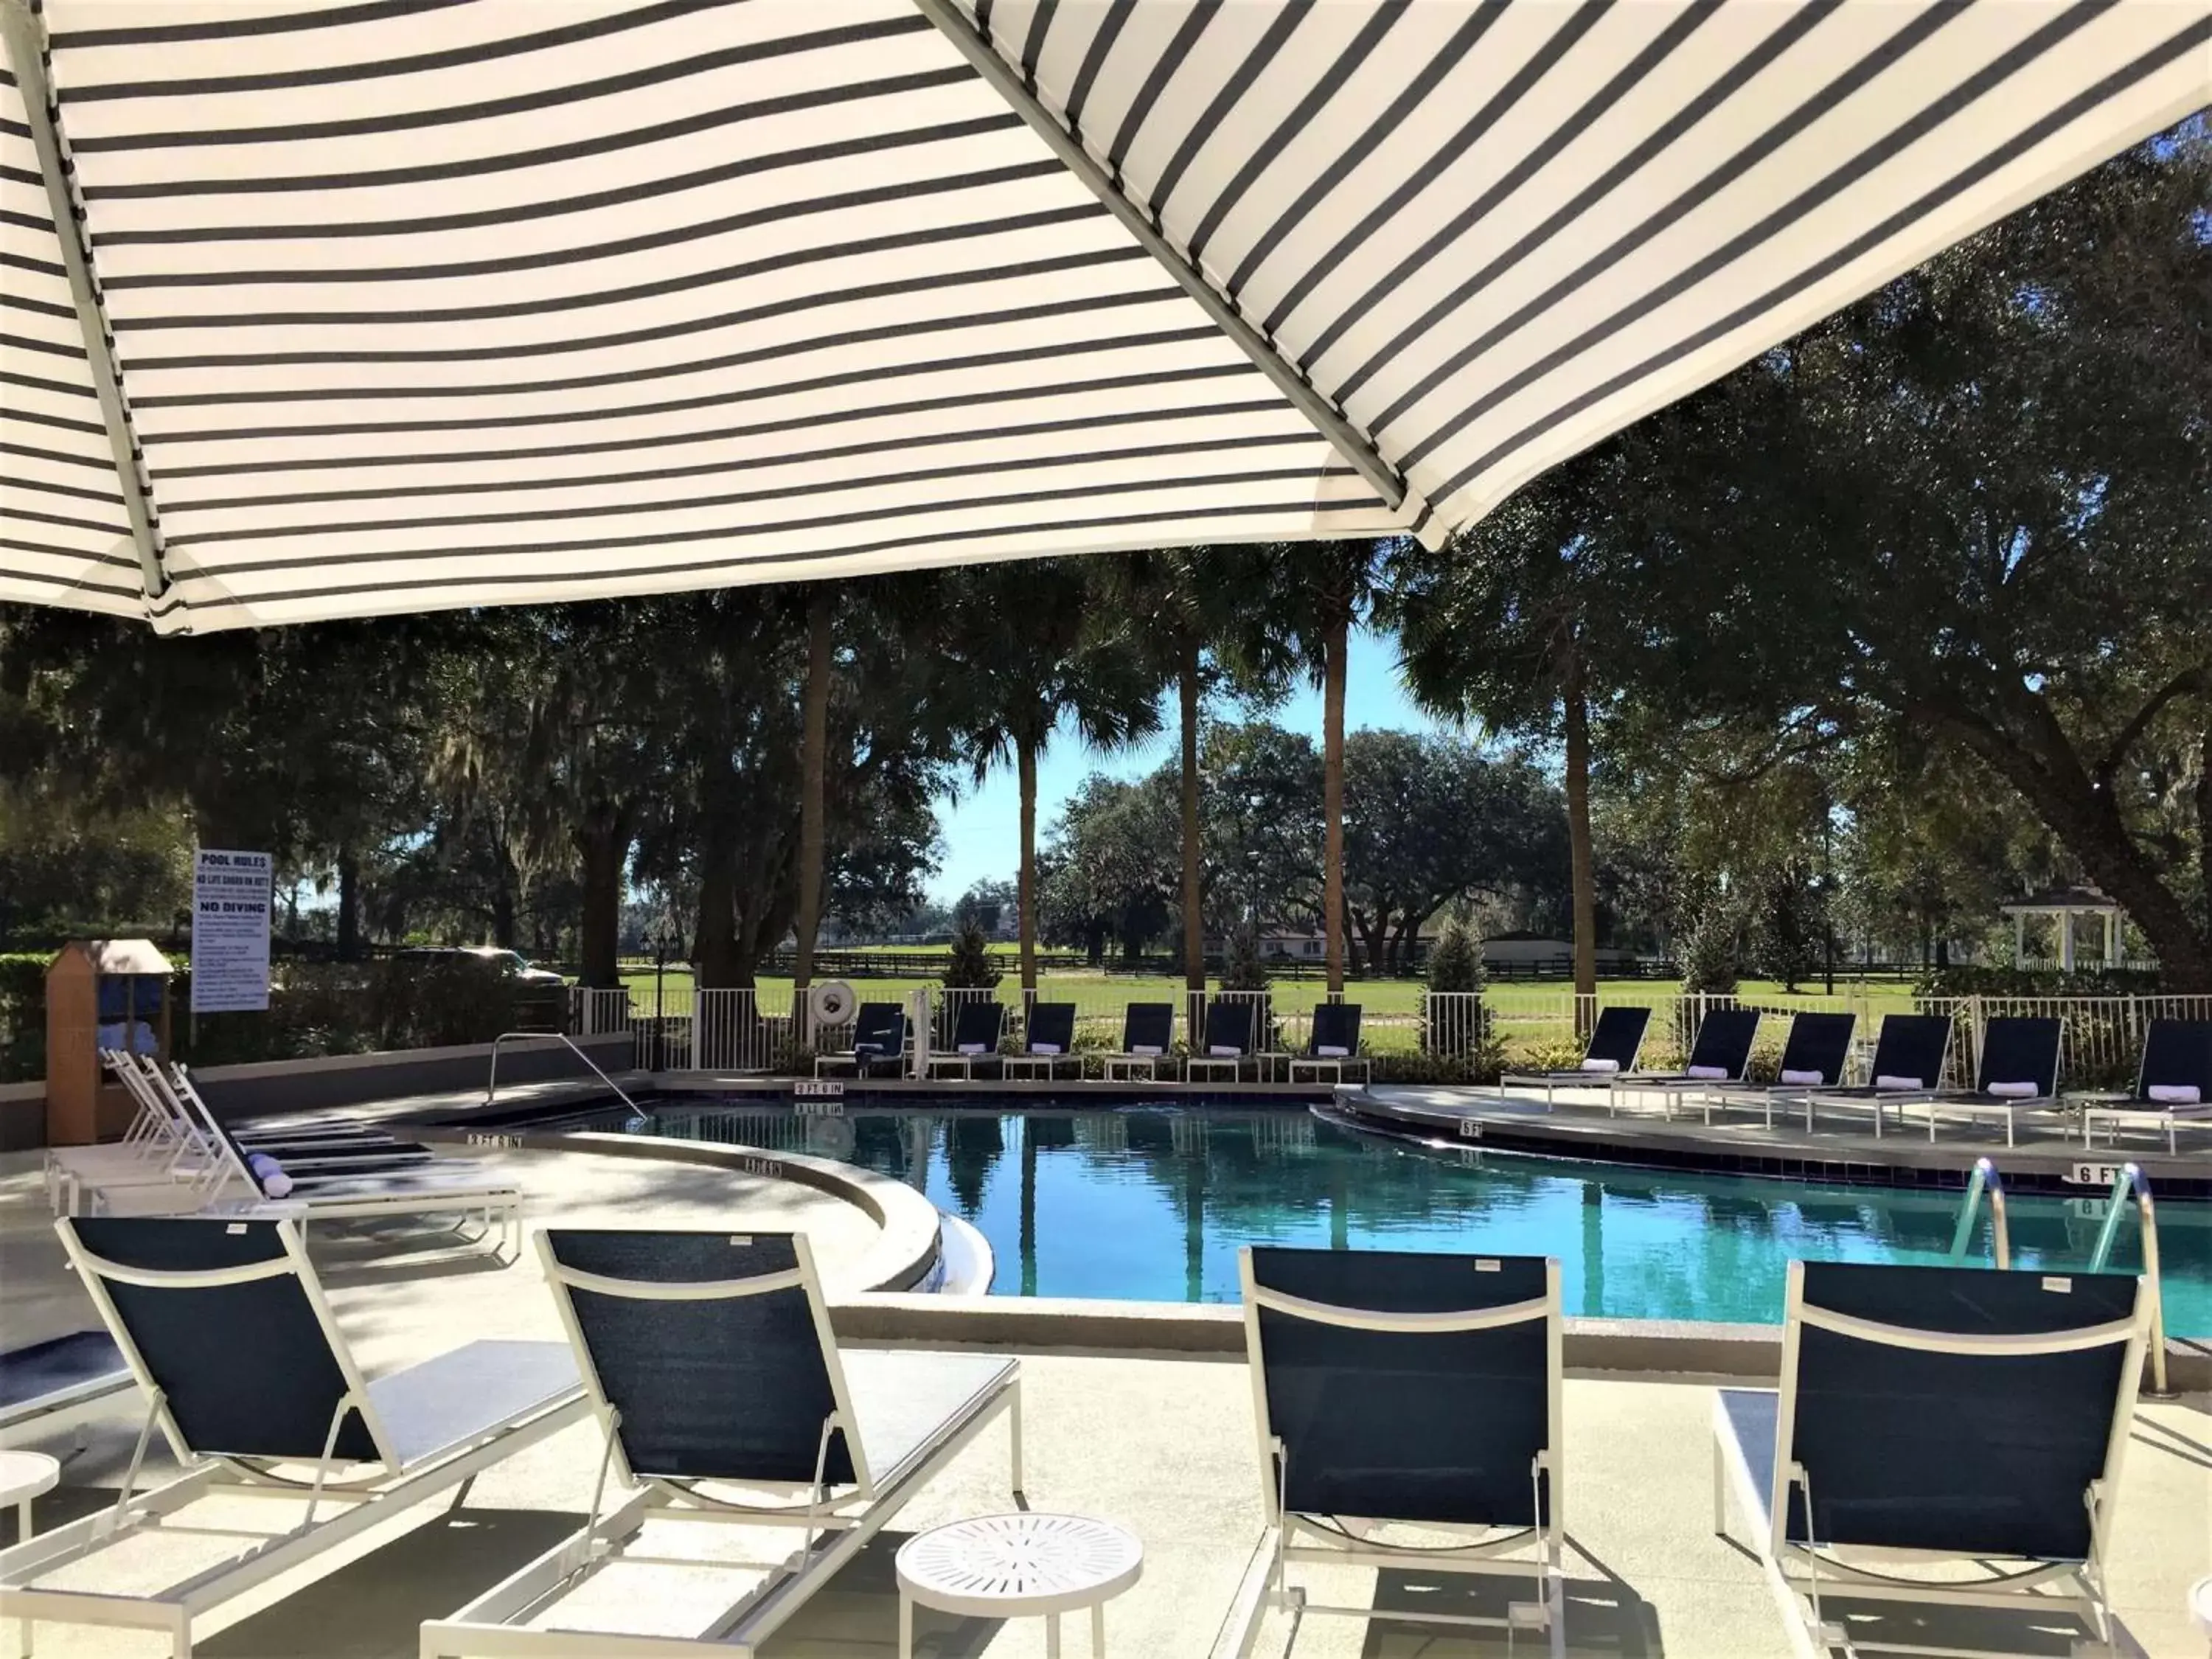 Property building, Swimming Pool in Hilton Ocala